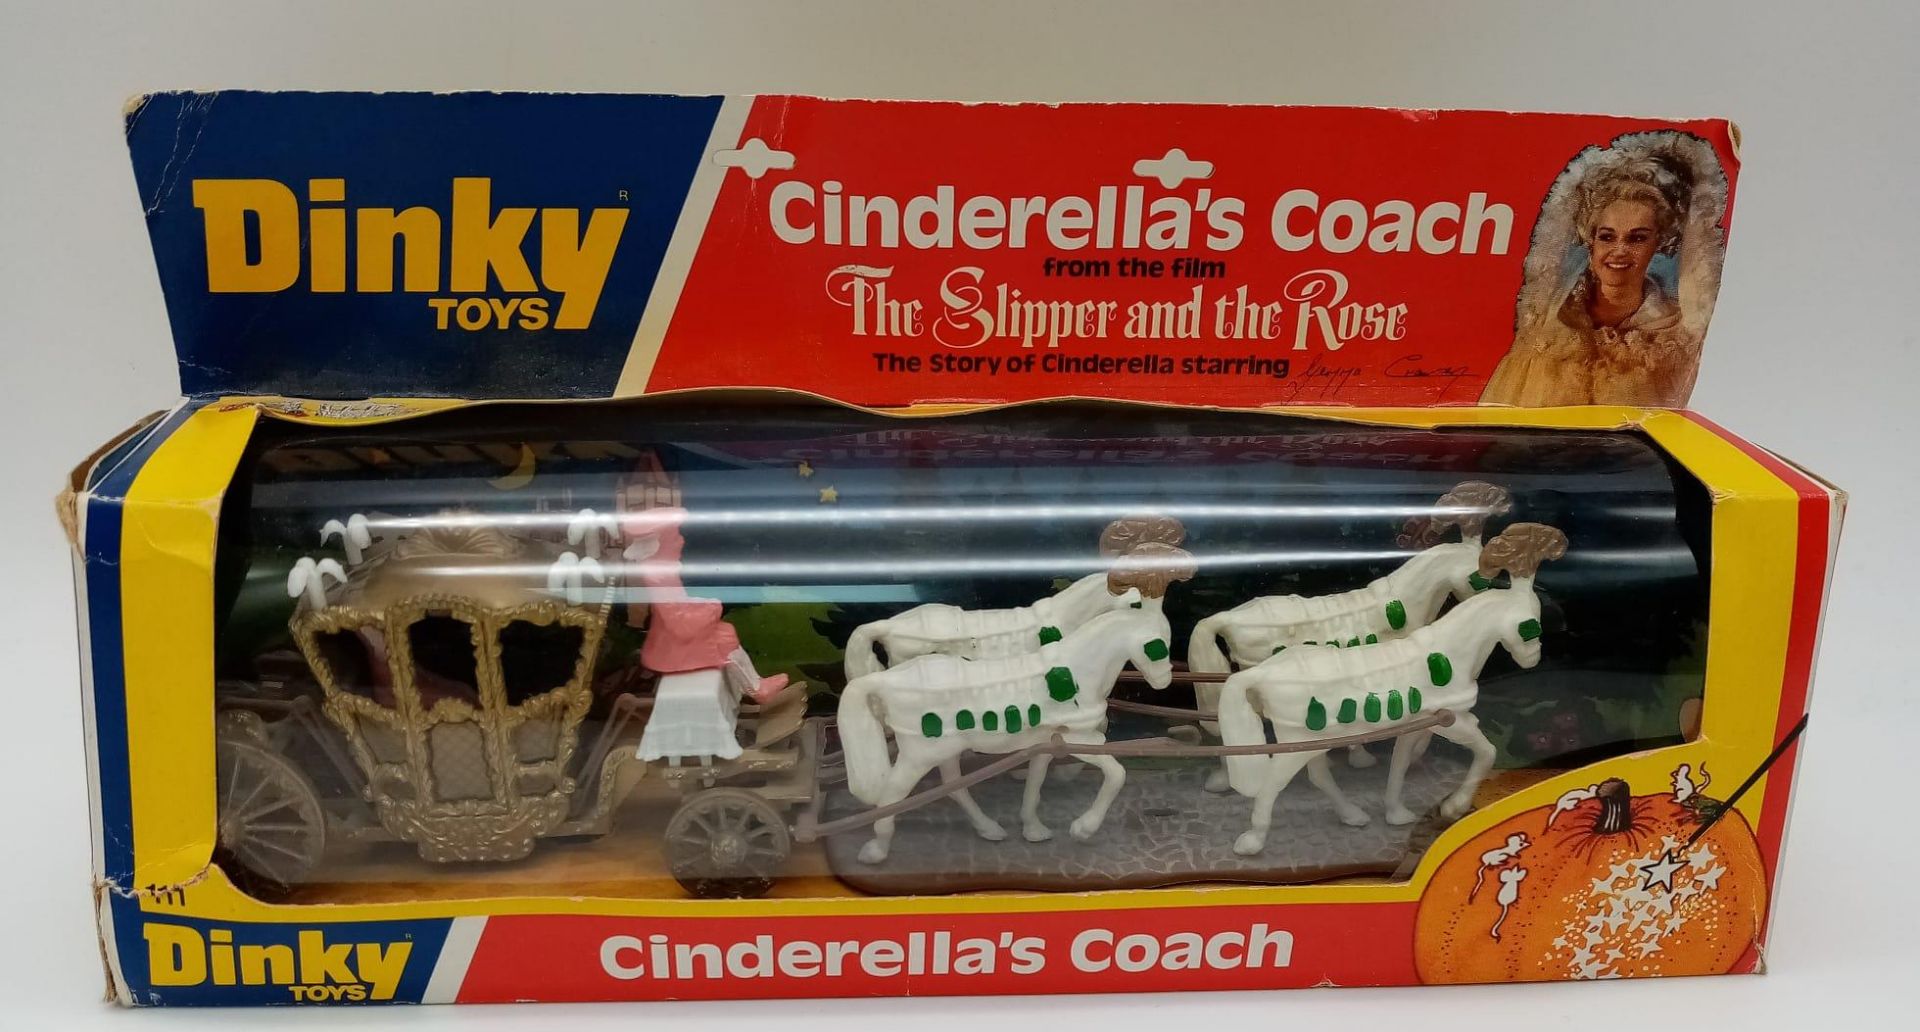 A Vintage Dinky Cinderella's Coach Model - From the movie The Slipper and the Rose. 28cm length.